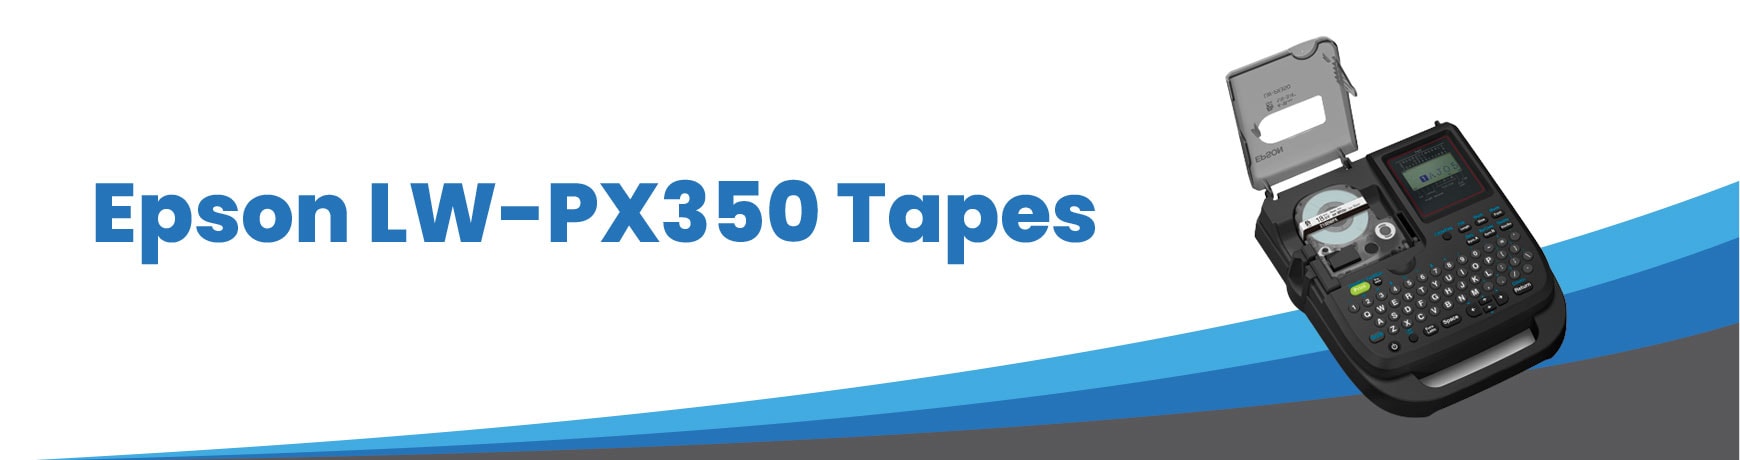 Epson LW-PX350 Tapes